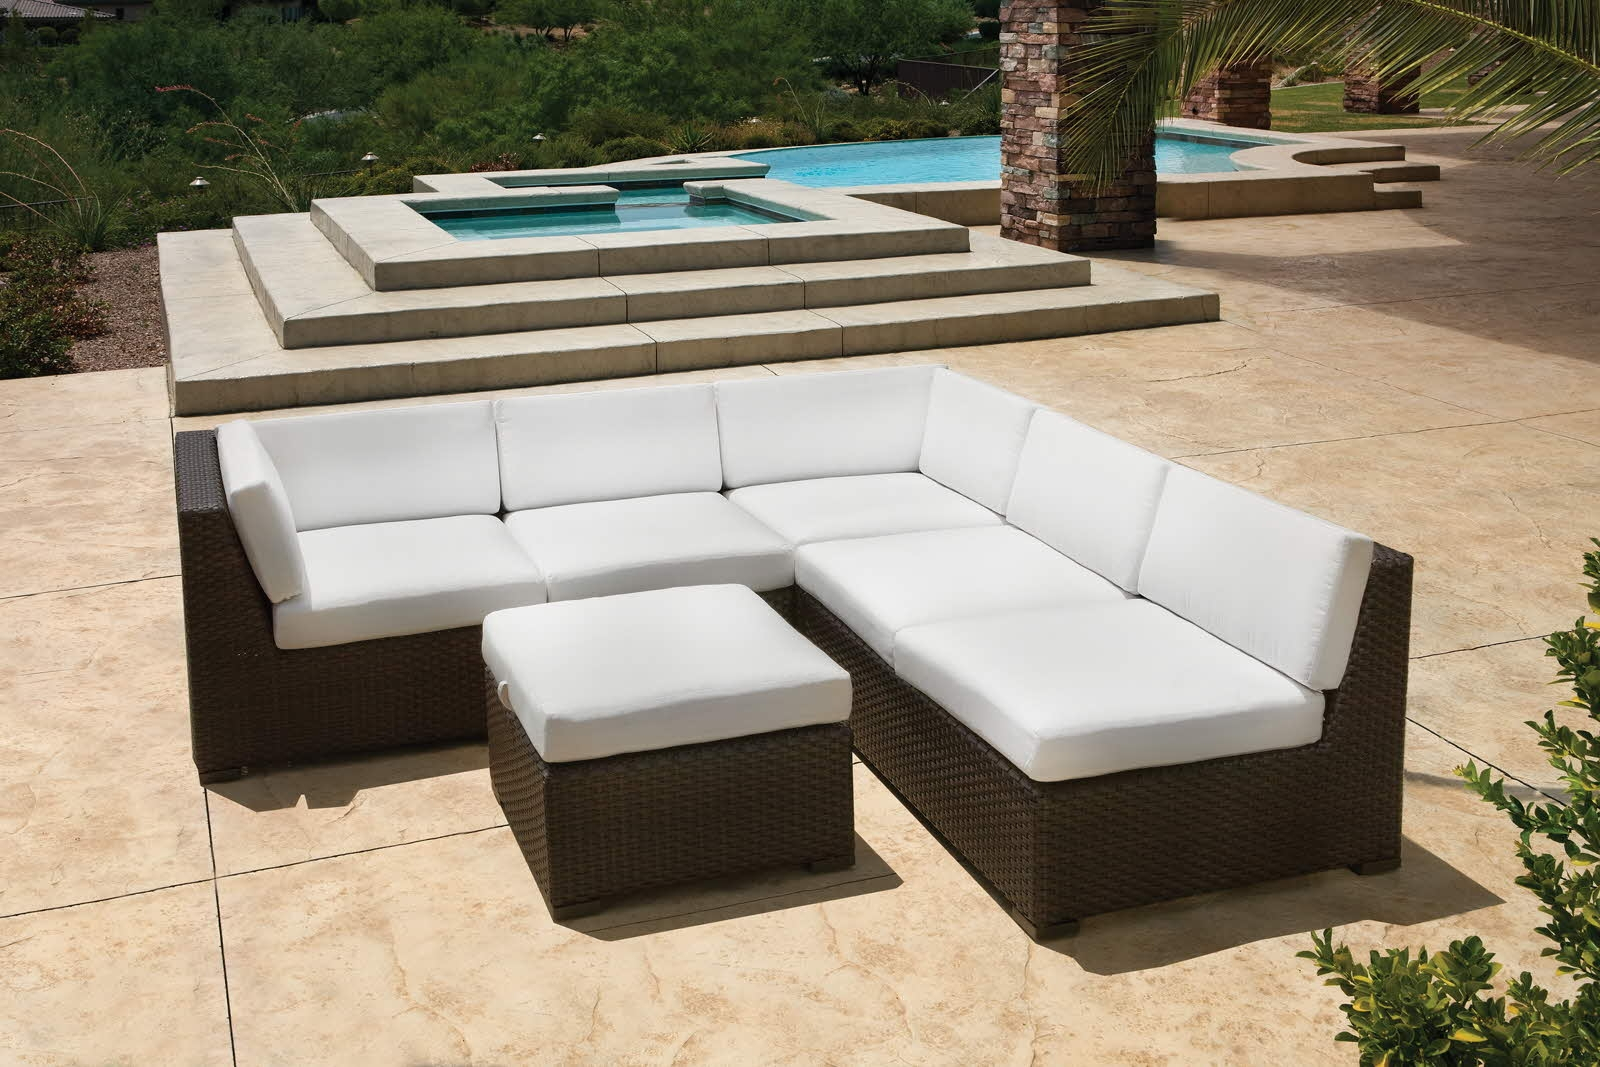 Pool Patio Furniture Pict Best Of Interior Deck Swimming with regard to dimensions 1600 X 1067